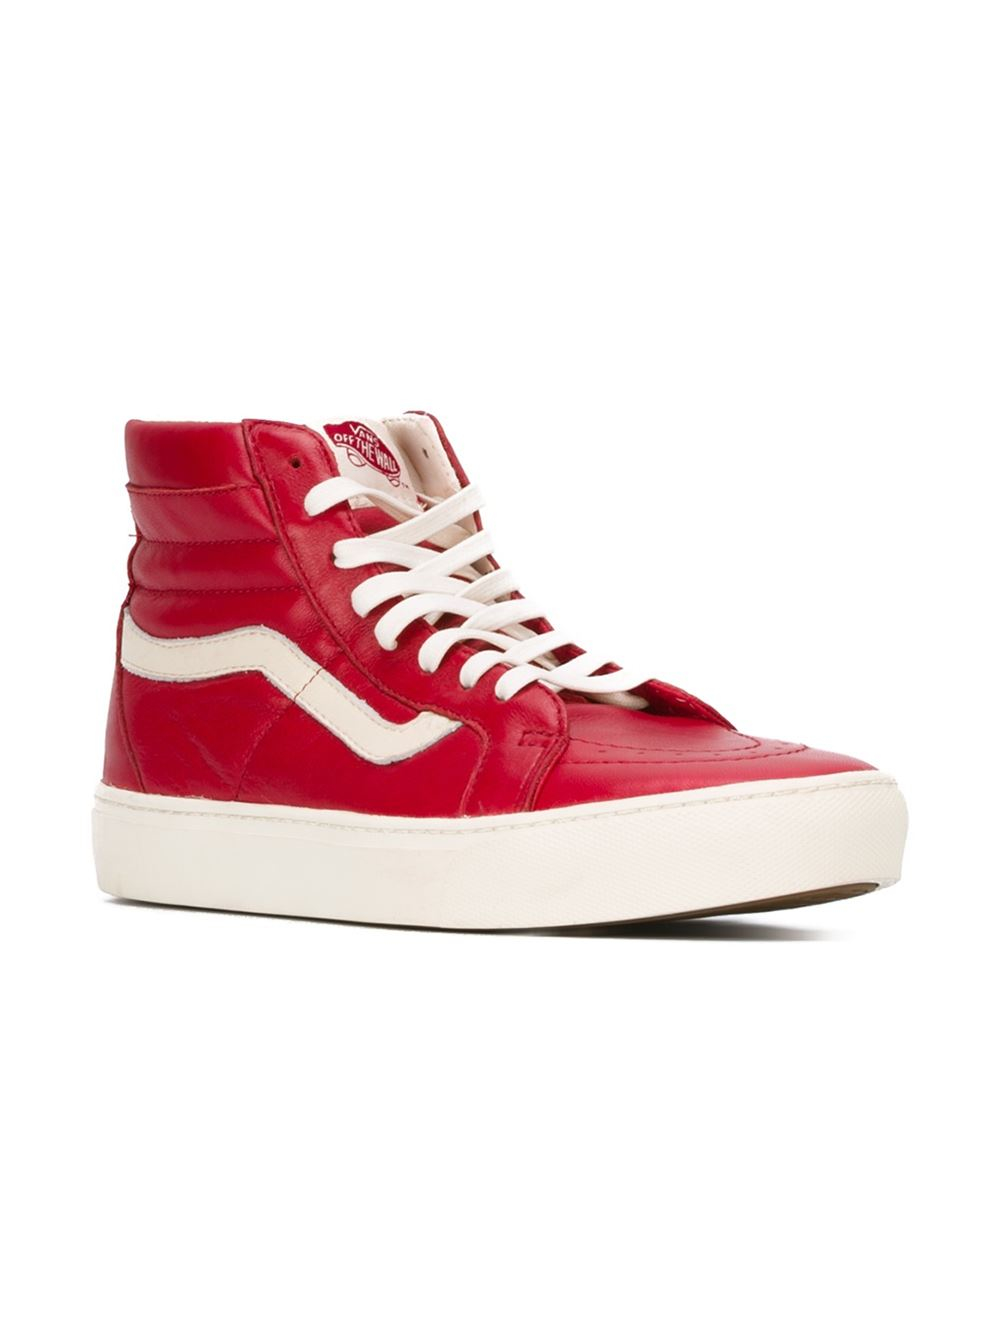 all red high top vans